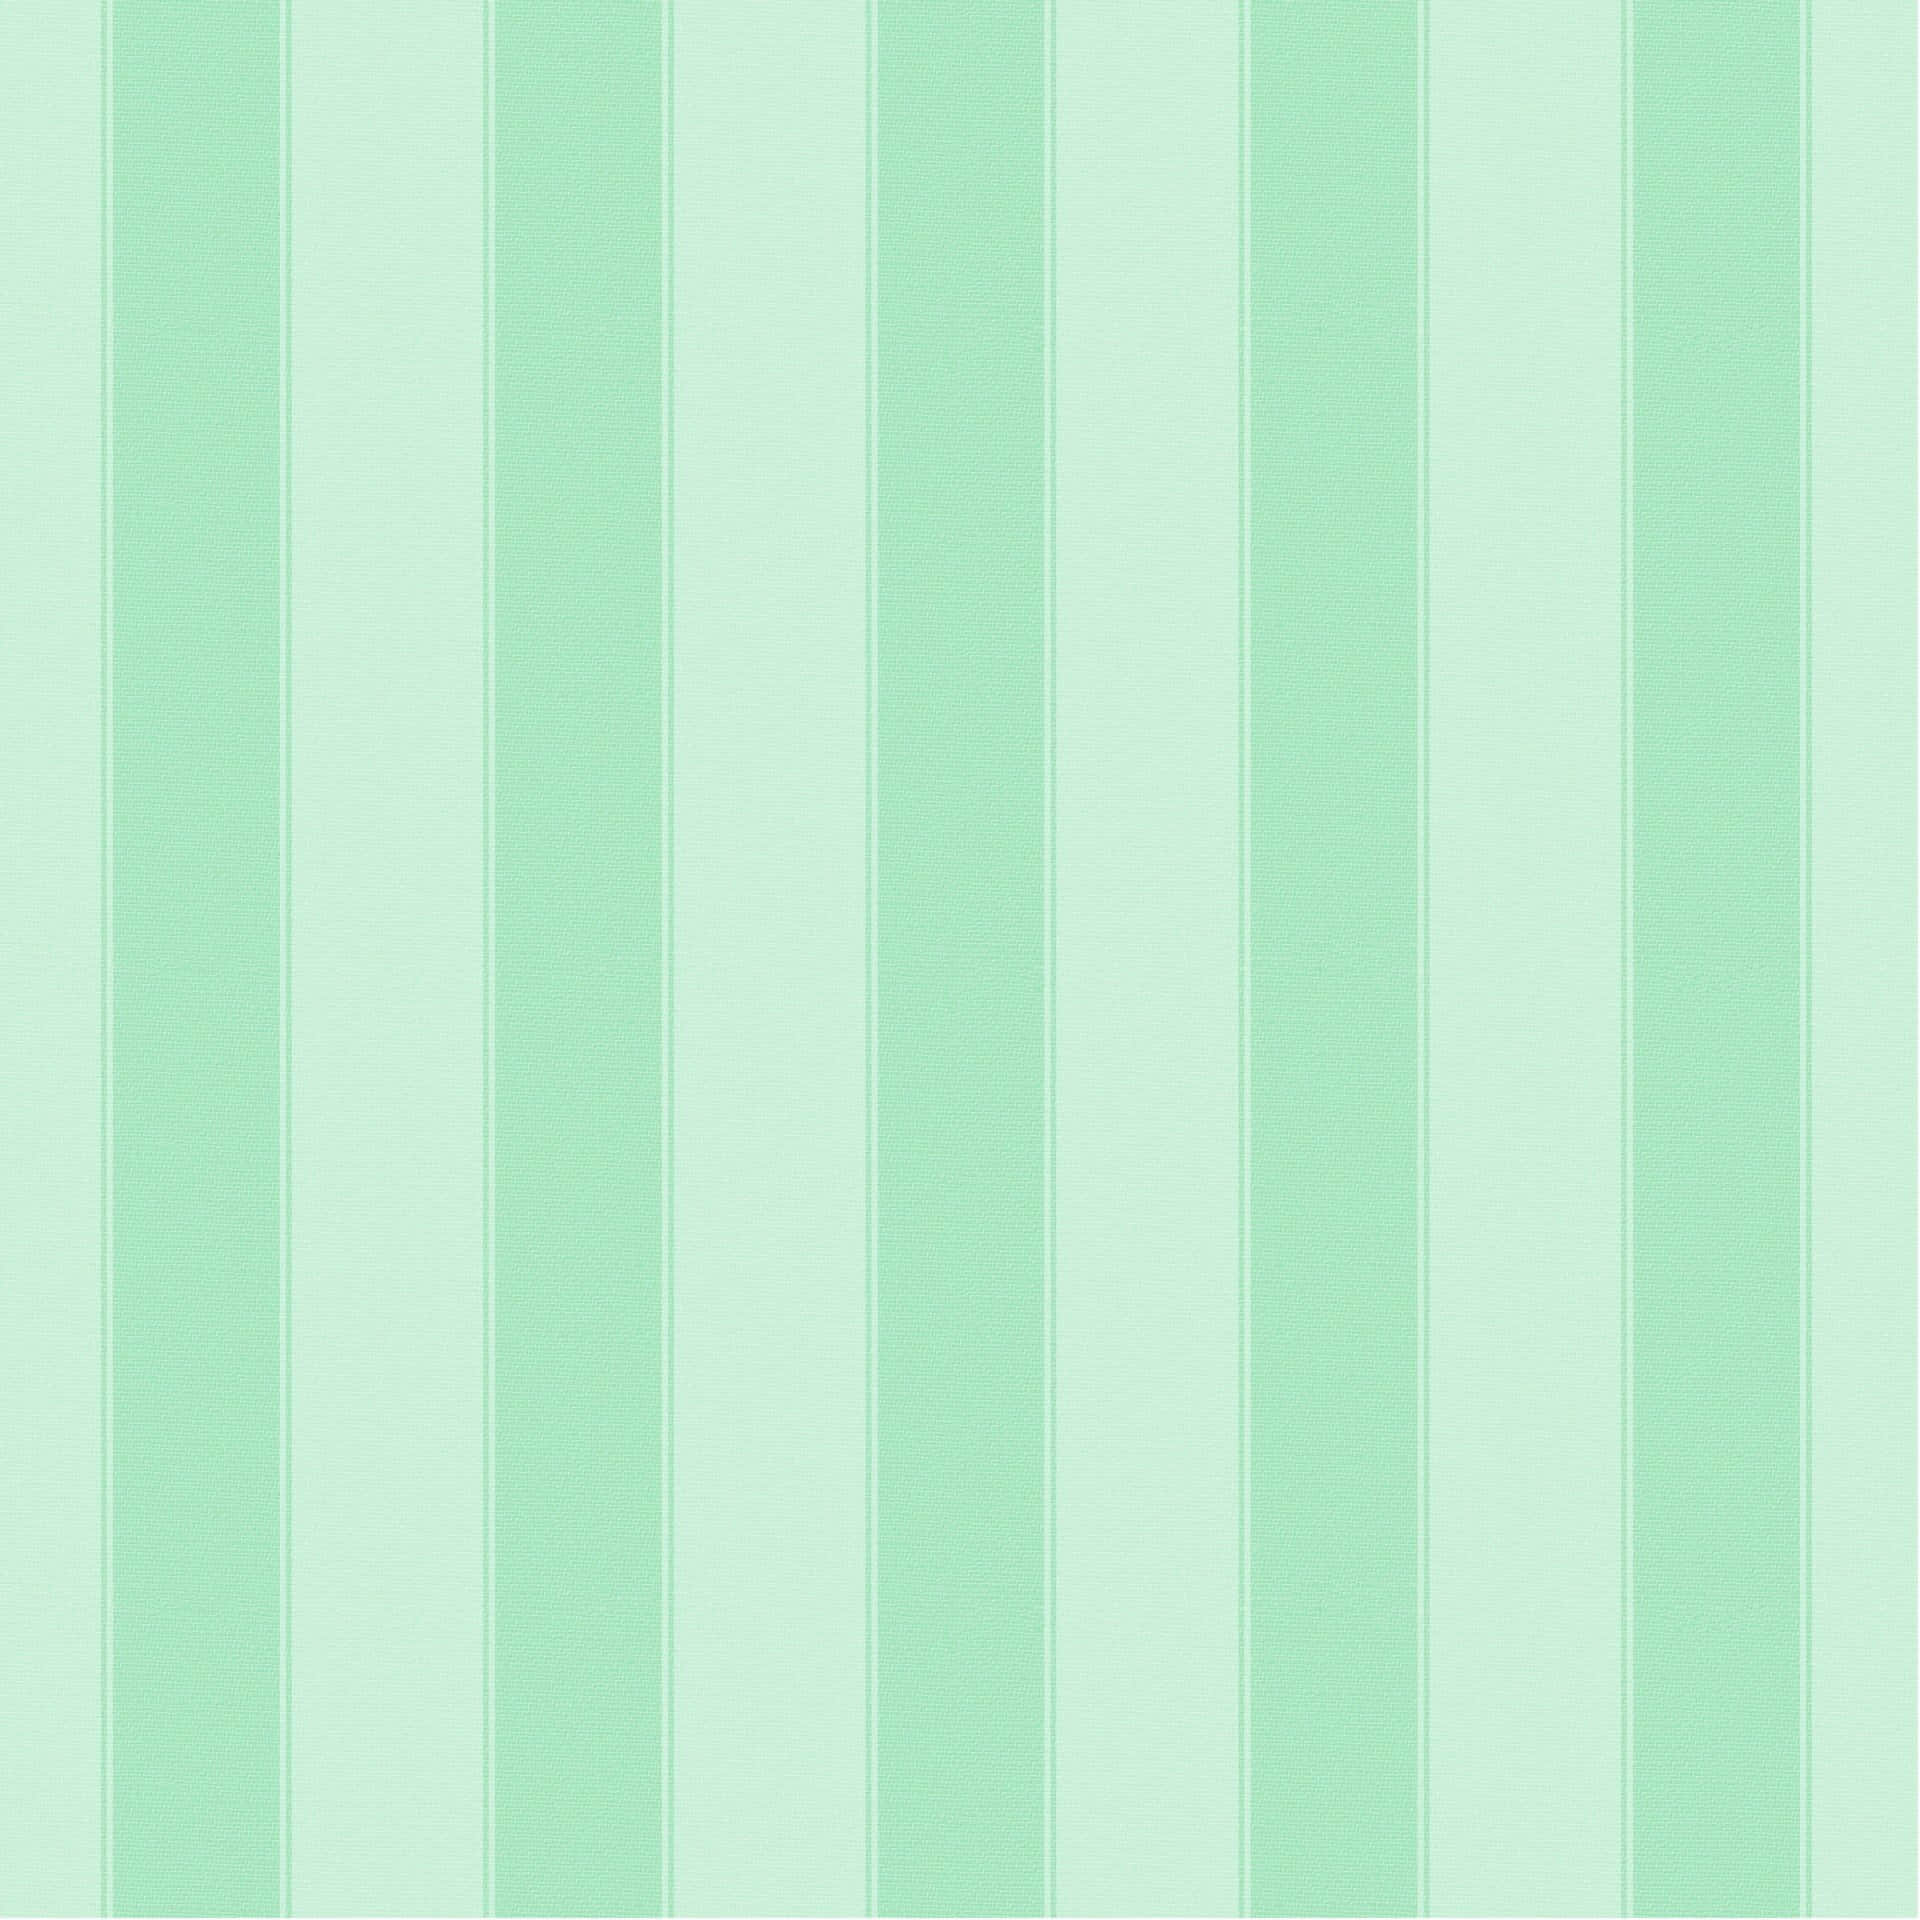 Tranquil pastel green background